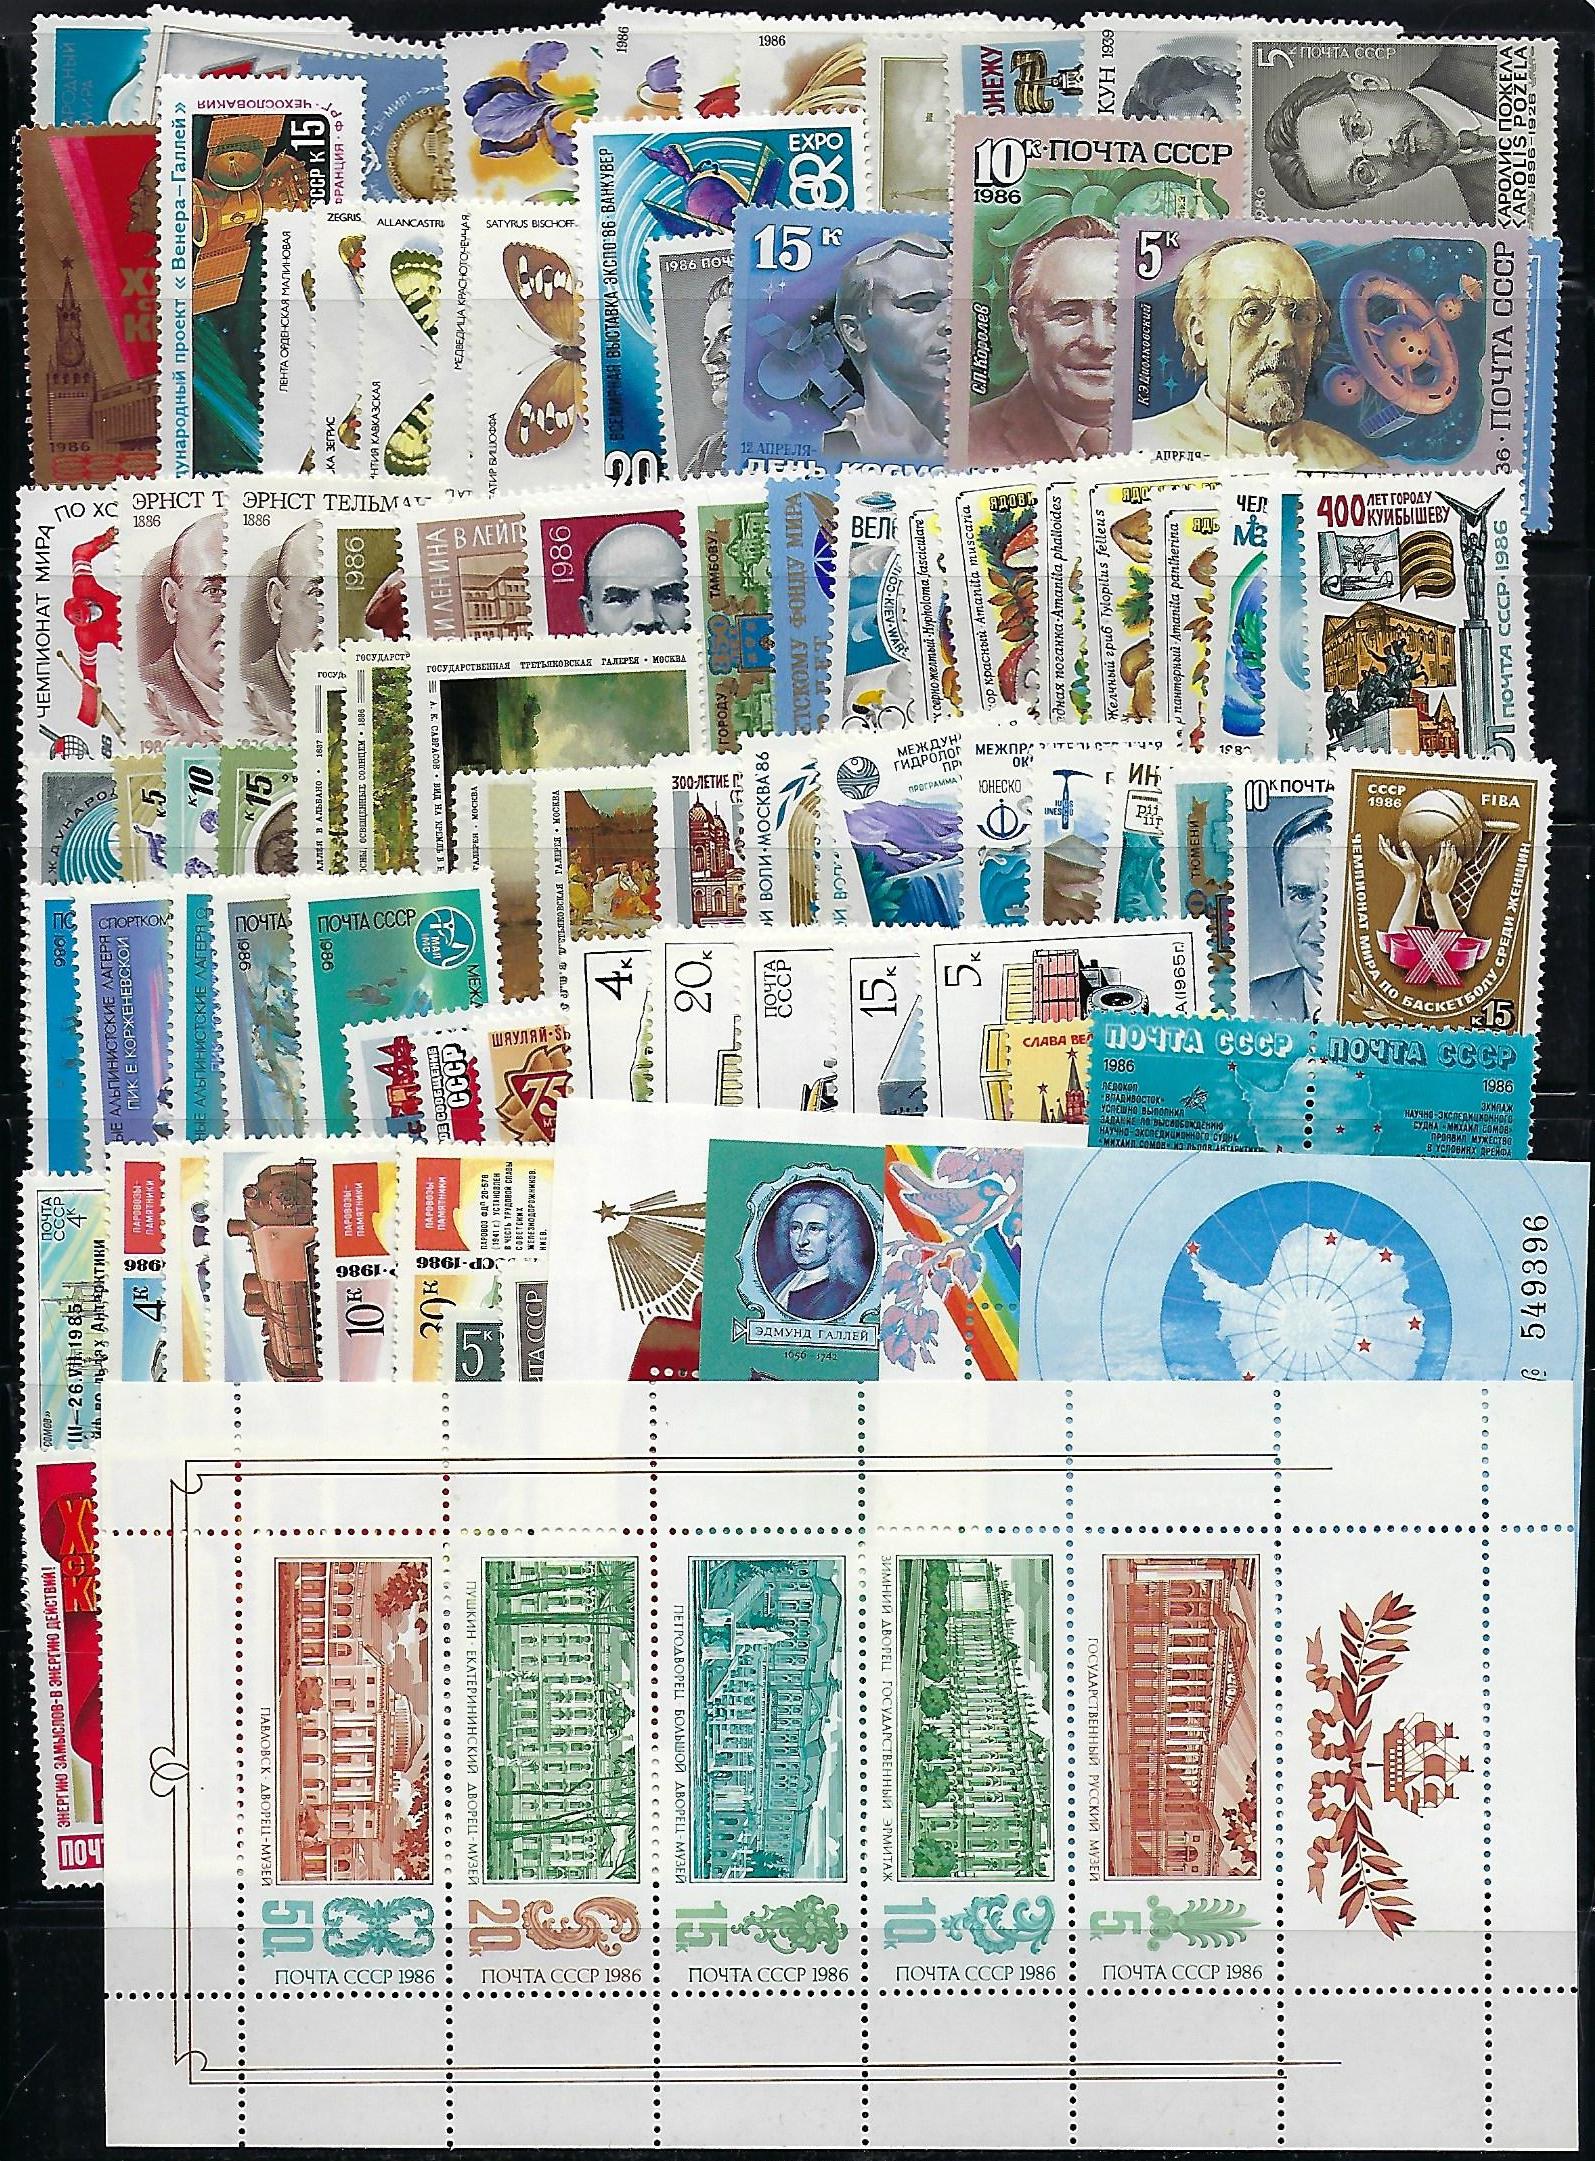 Russia - Year Sets RUSSIA YEAR SETS Scott 5419-5523 